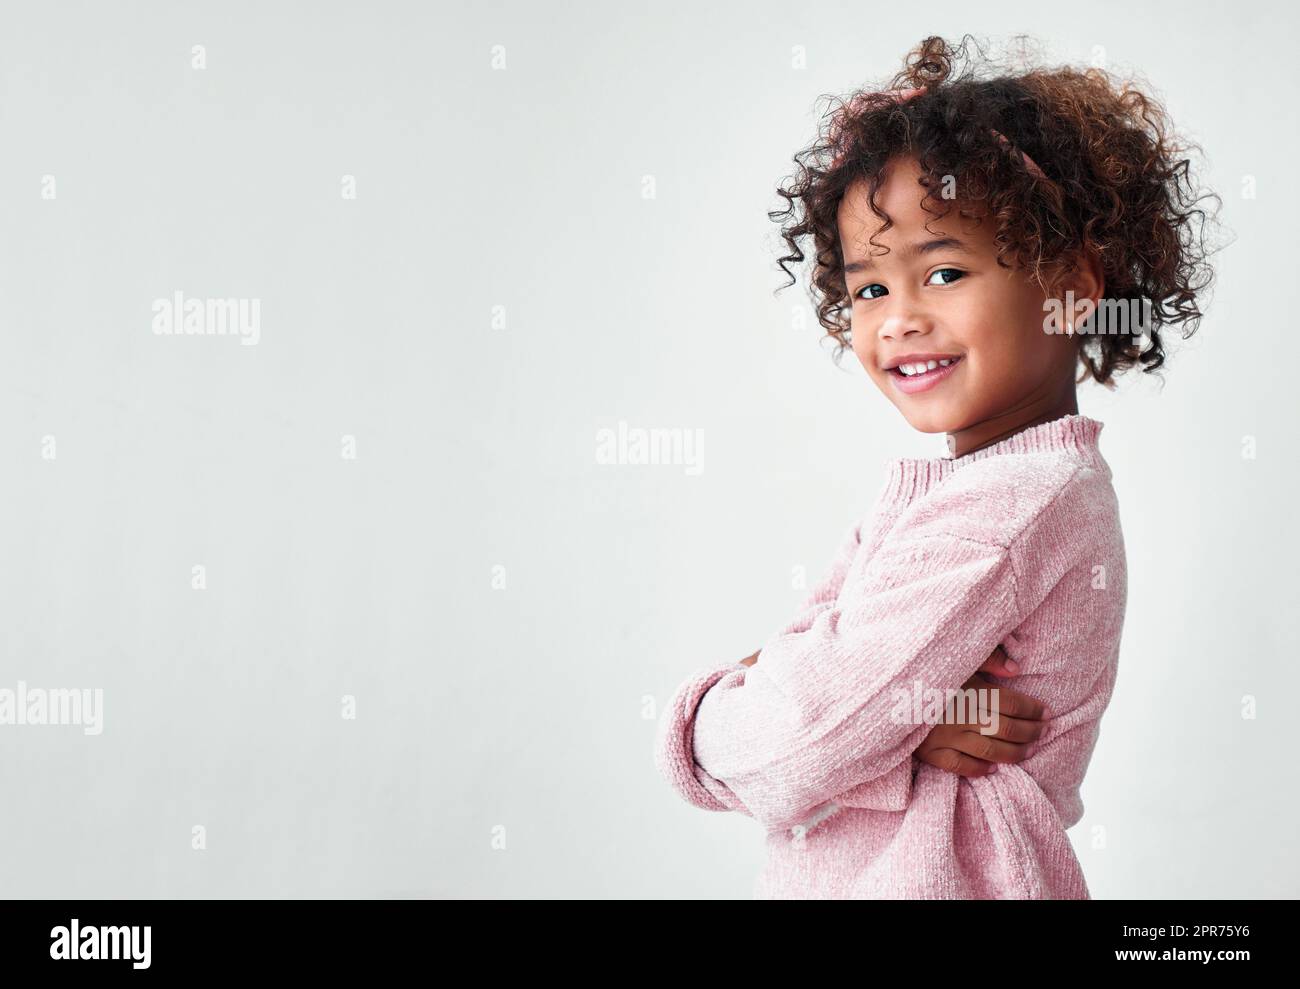 Shes laughter and joy. Shot of a little girl standing with crossed arms against a grey background. Stock Photo